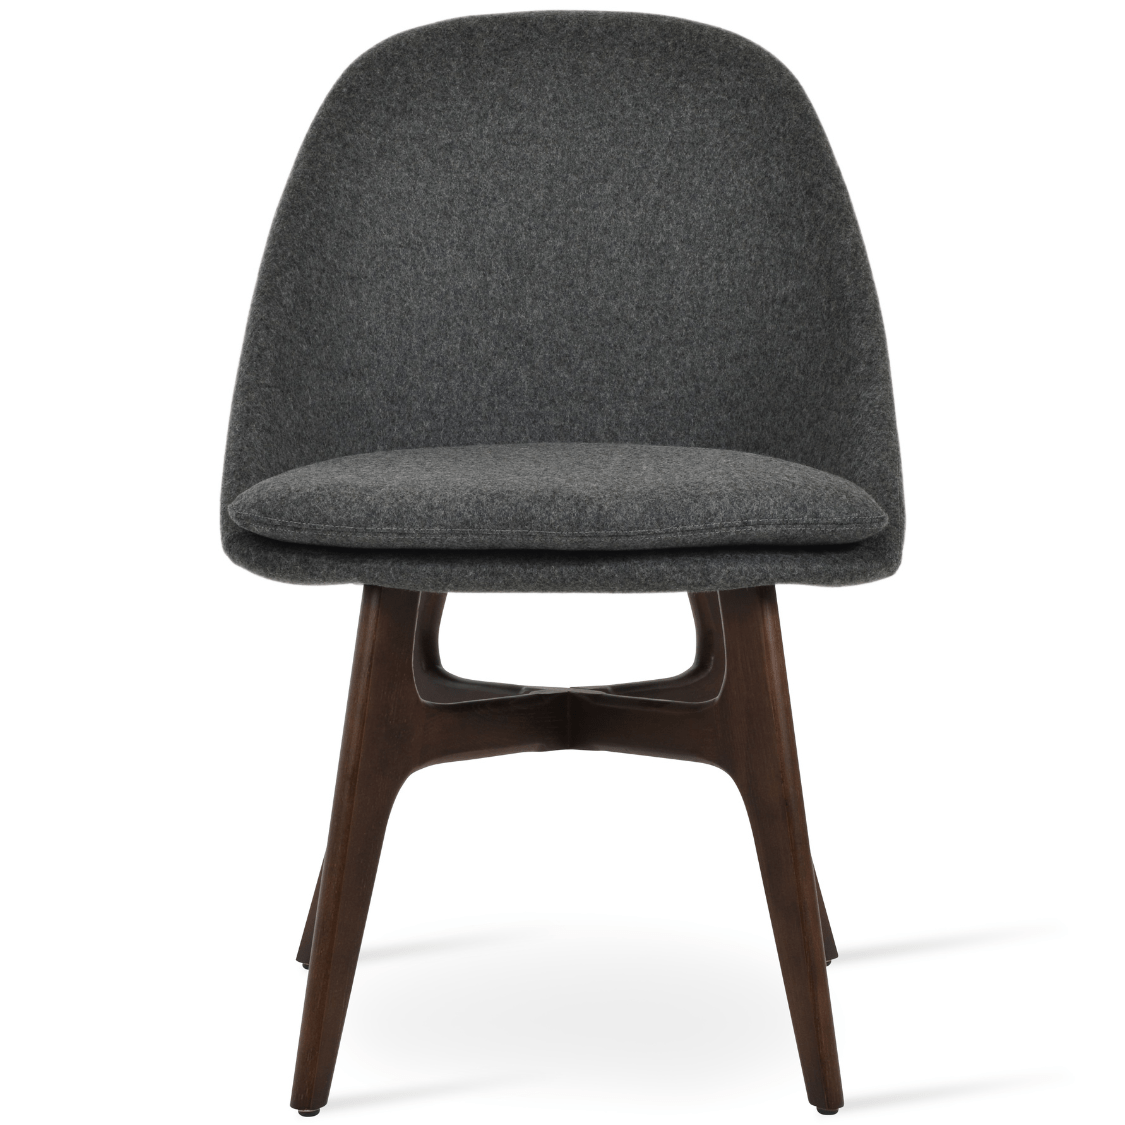 Avanos Rounded Dining Chair - Your Bar Stools Canada